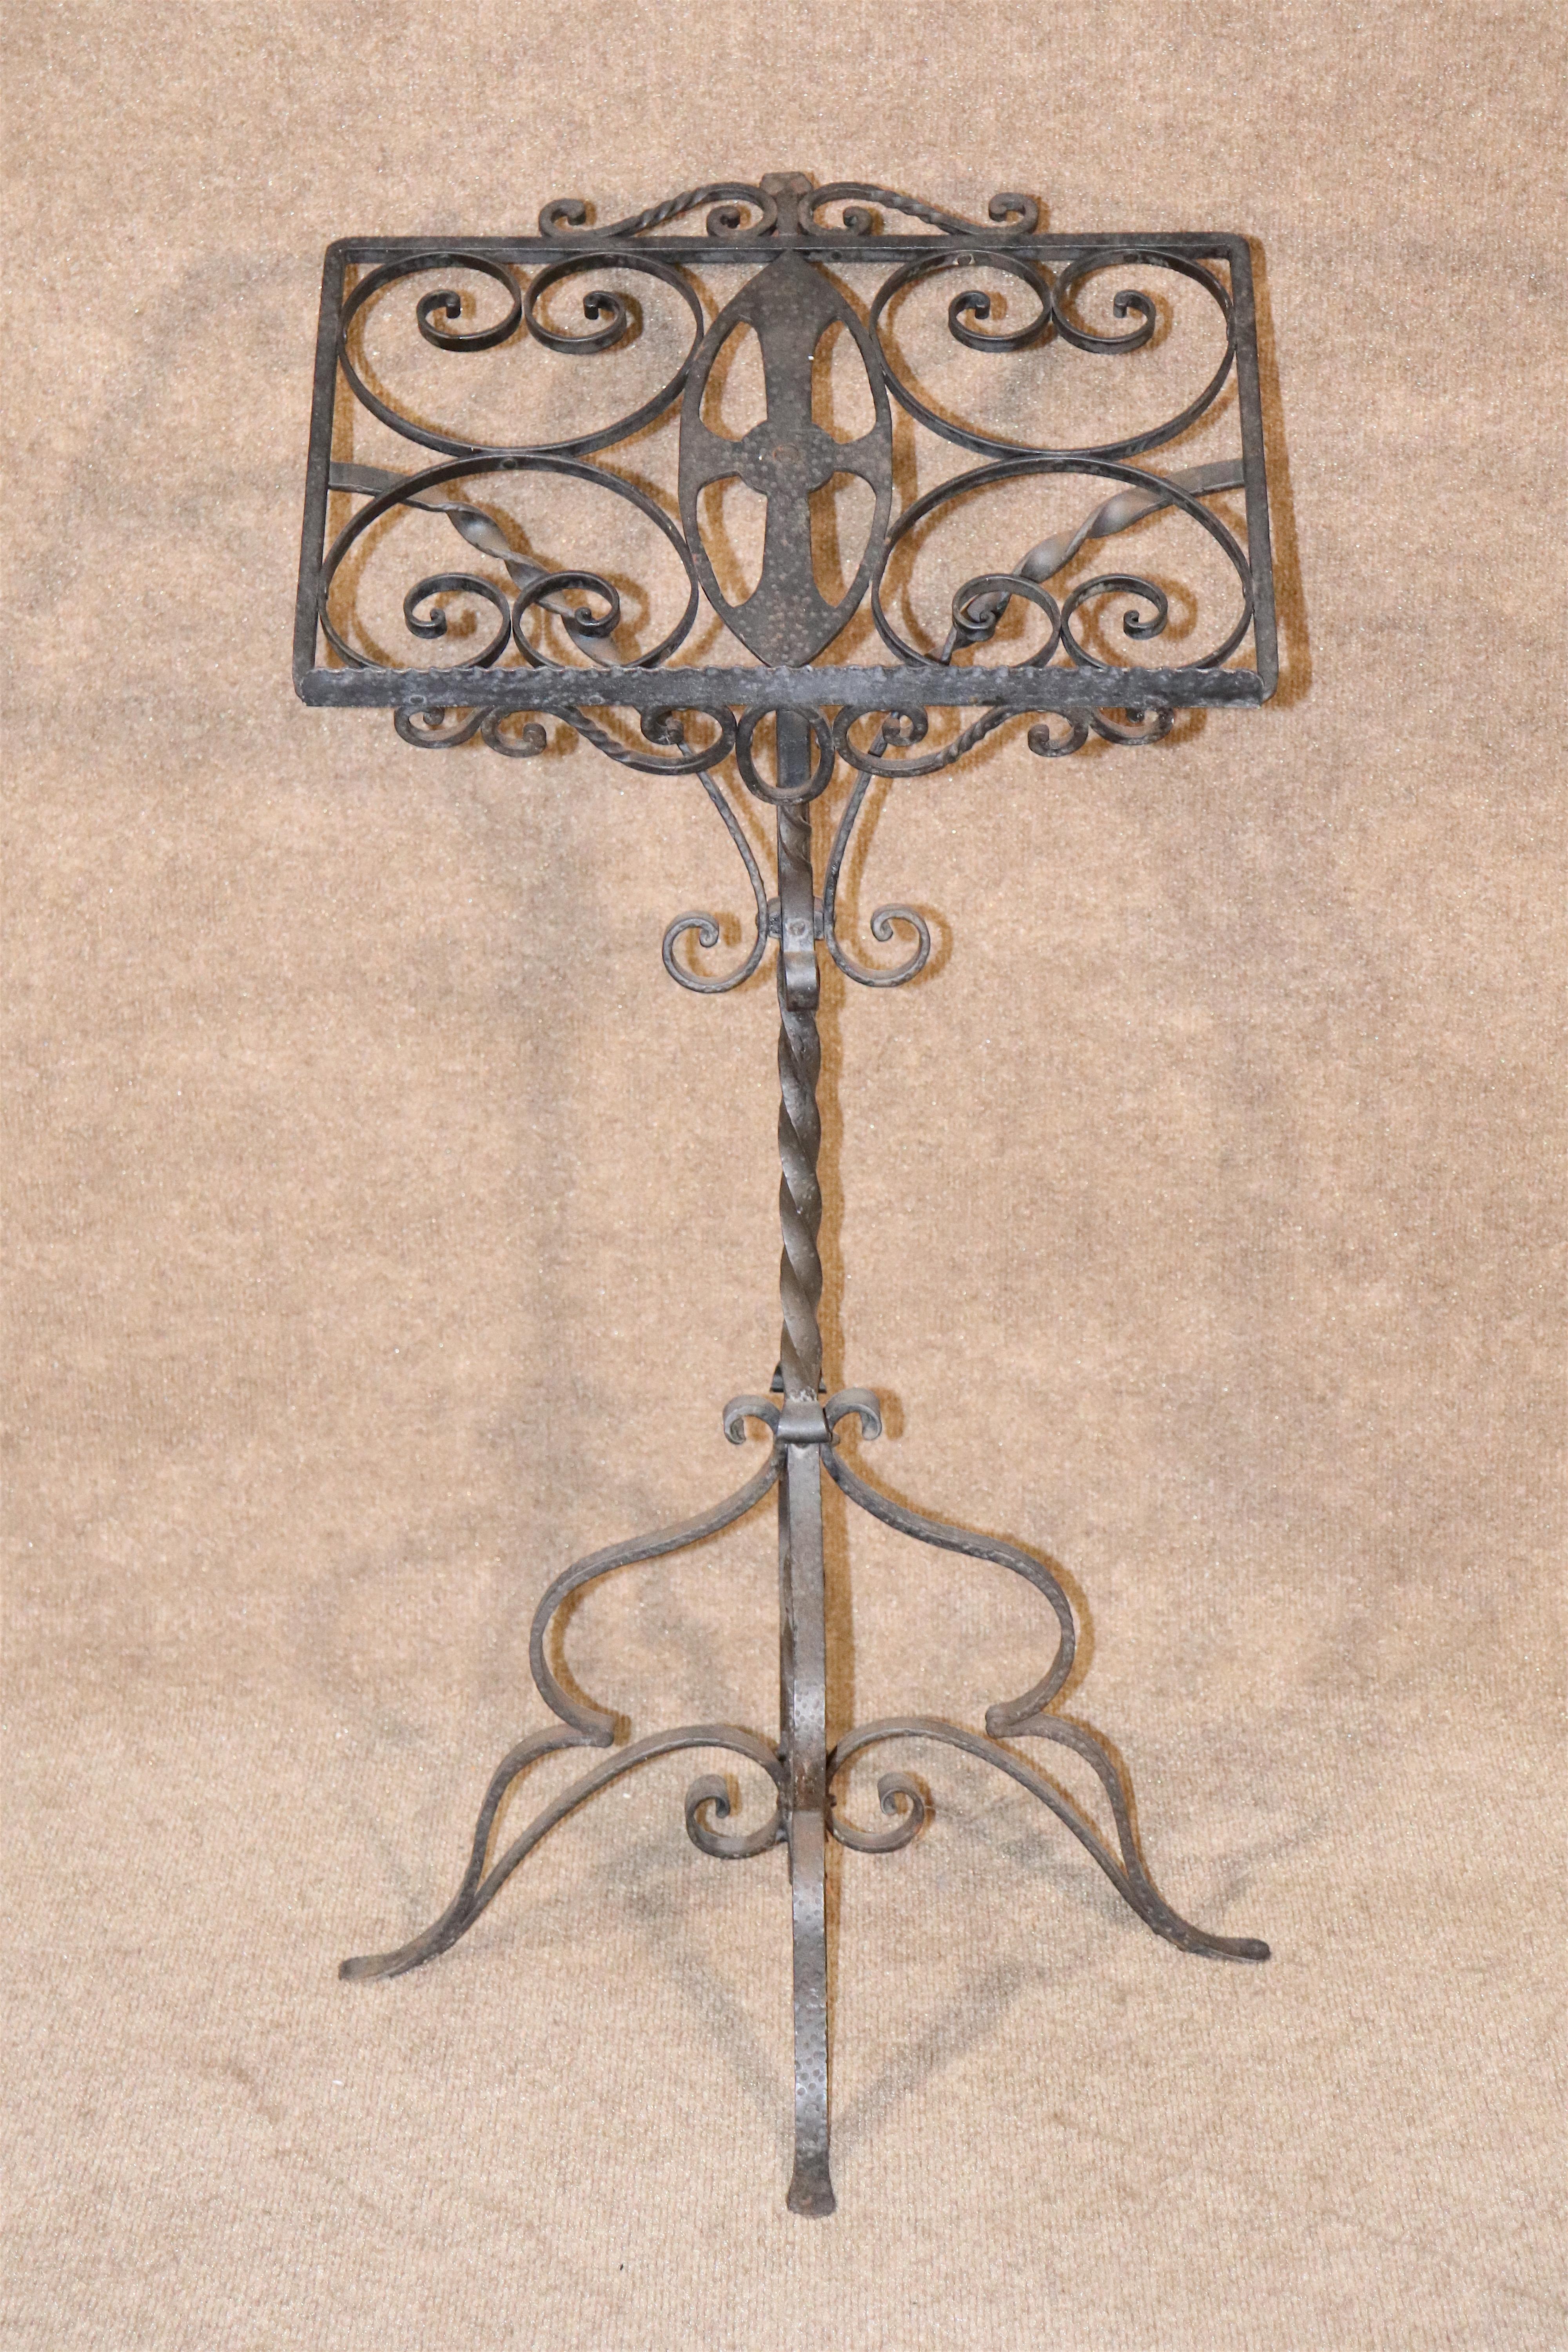 Beautiful iron stand with decorative scrolling details. Great for use for sheet music or as a hostess stand.
Please confirm location.